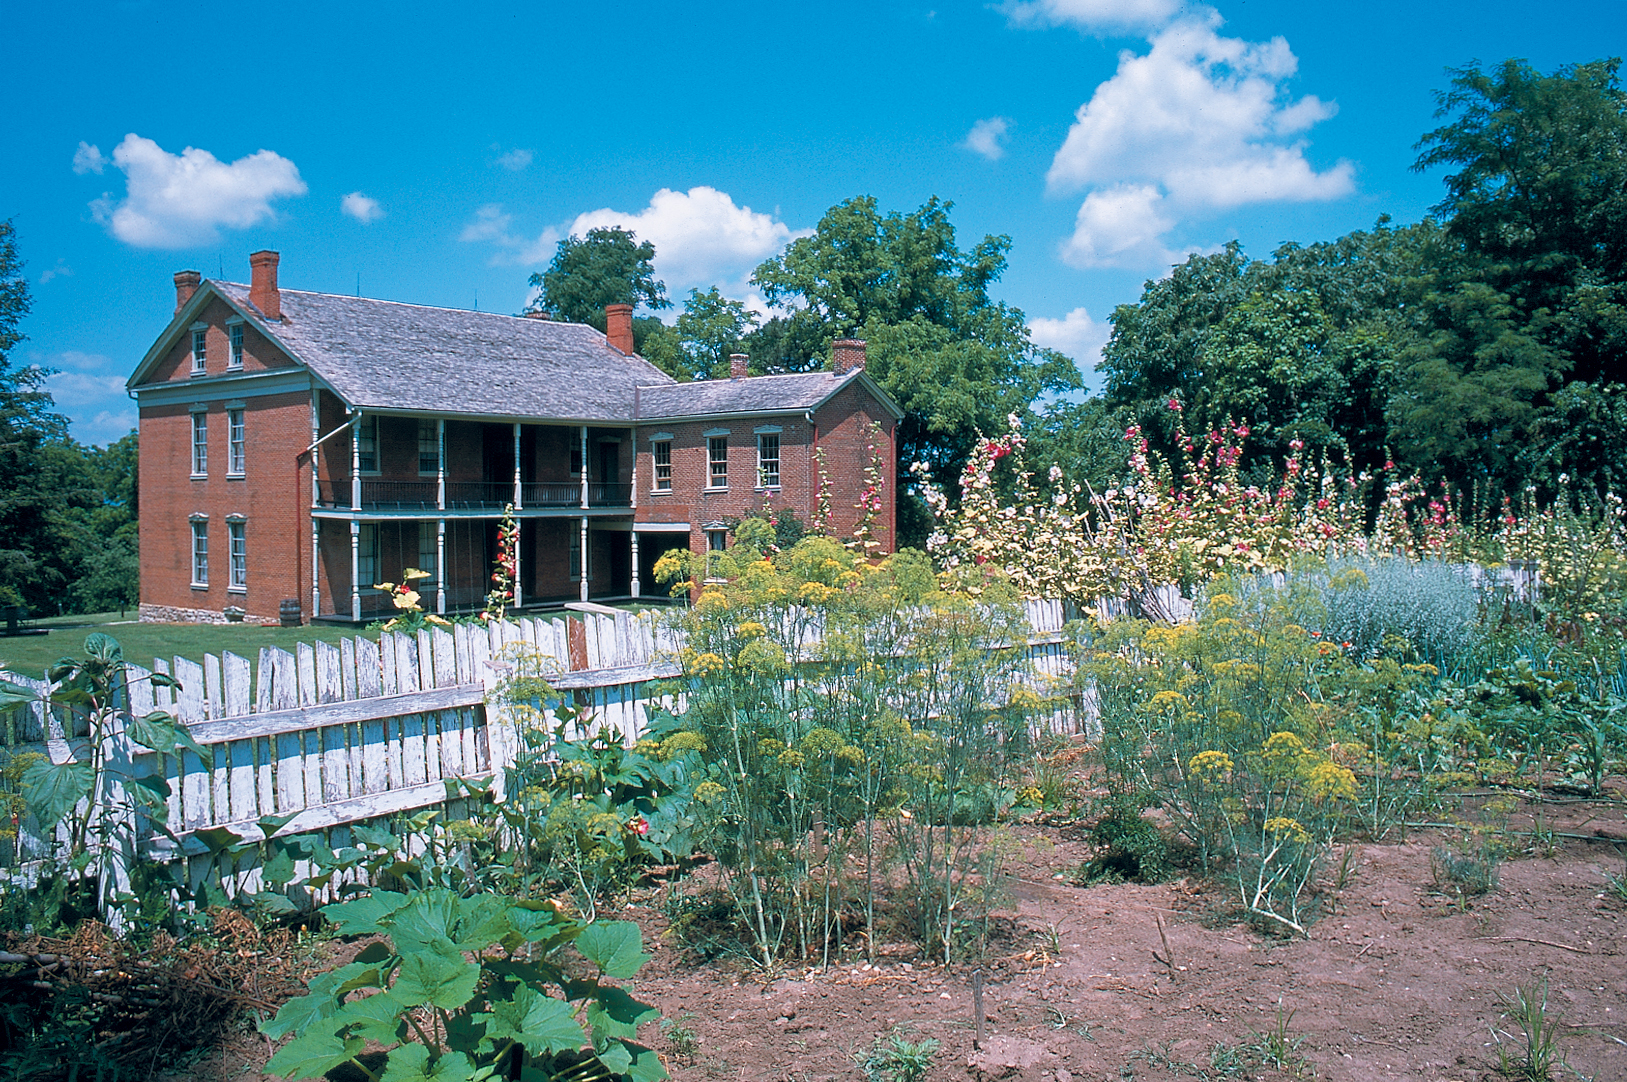 Exterior of the Anderson House with the garden in the foreground